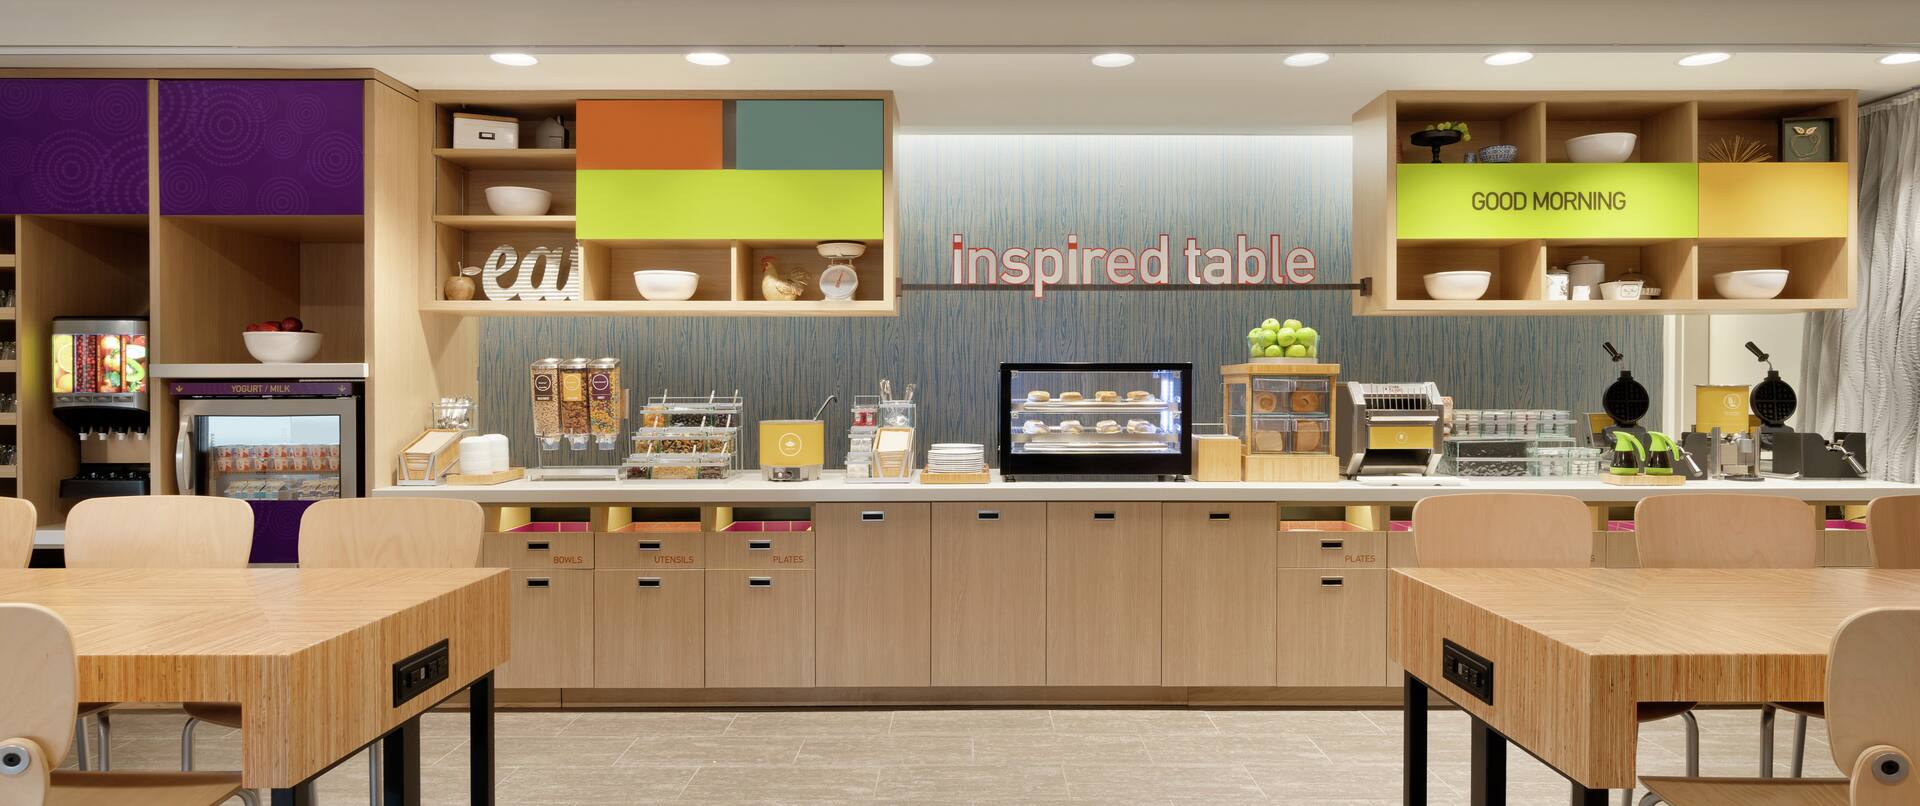 Bright breakfast area featuring family style seating and complimentary daily buffet.